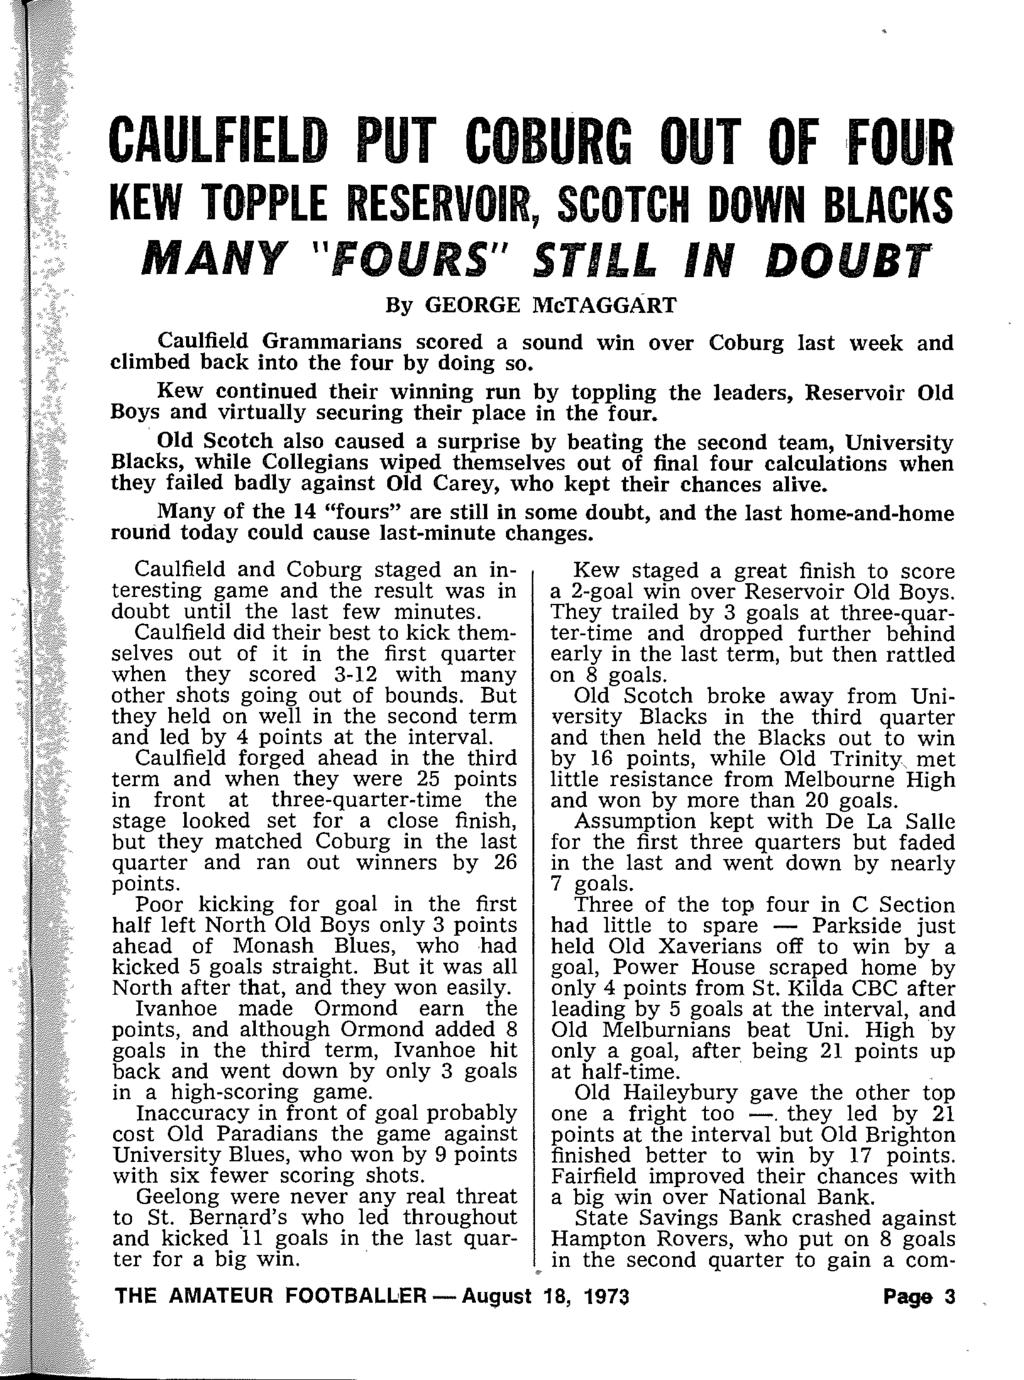 CAULFIELD PUT COBURG O UT OF FOUR KEW TOPPLE RESERVOIR, SCOTCH DOWN BLACKS MANY "FOURS" STILL IN DOUB T By GEORGE McTAGGART Caulfield Grammarians scored a sound win over Coburg last week and climbed